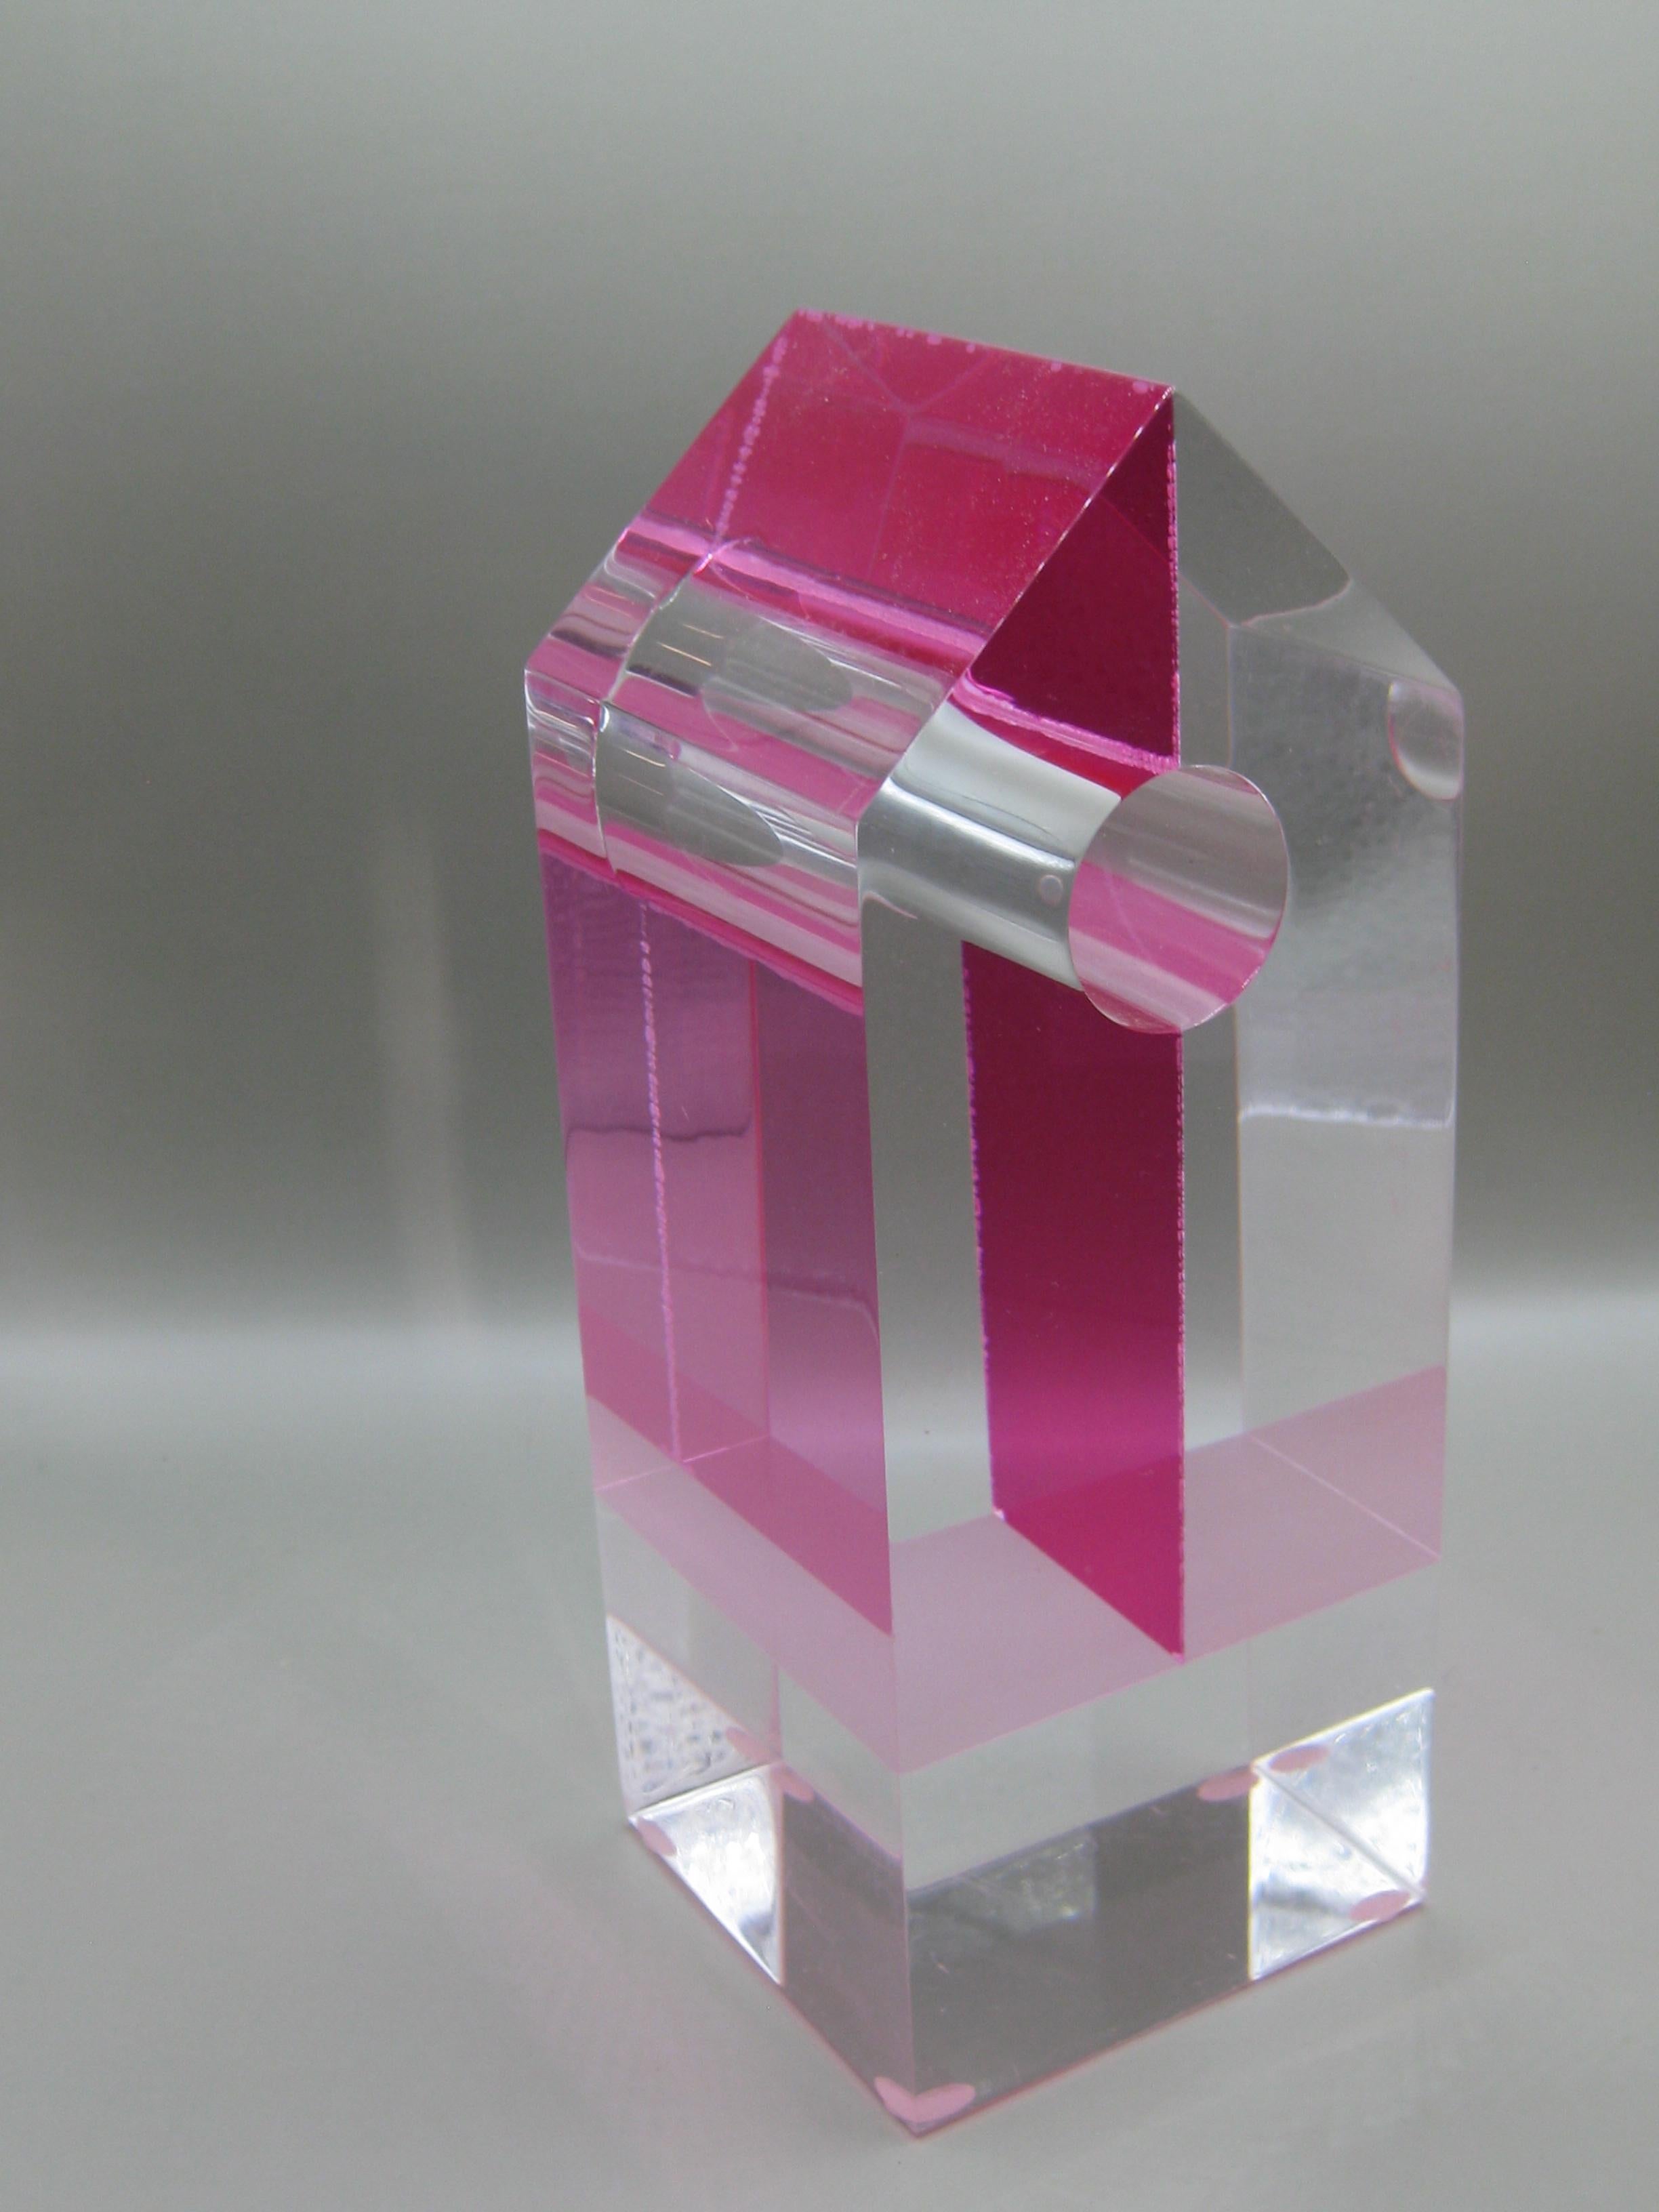 1960's-1970's Lucite Acrylic Optical Op Art Abstract Sculpture For Sale 2